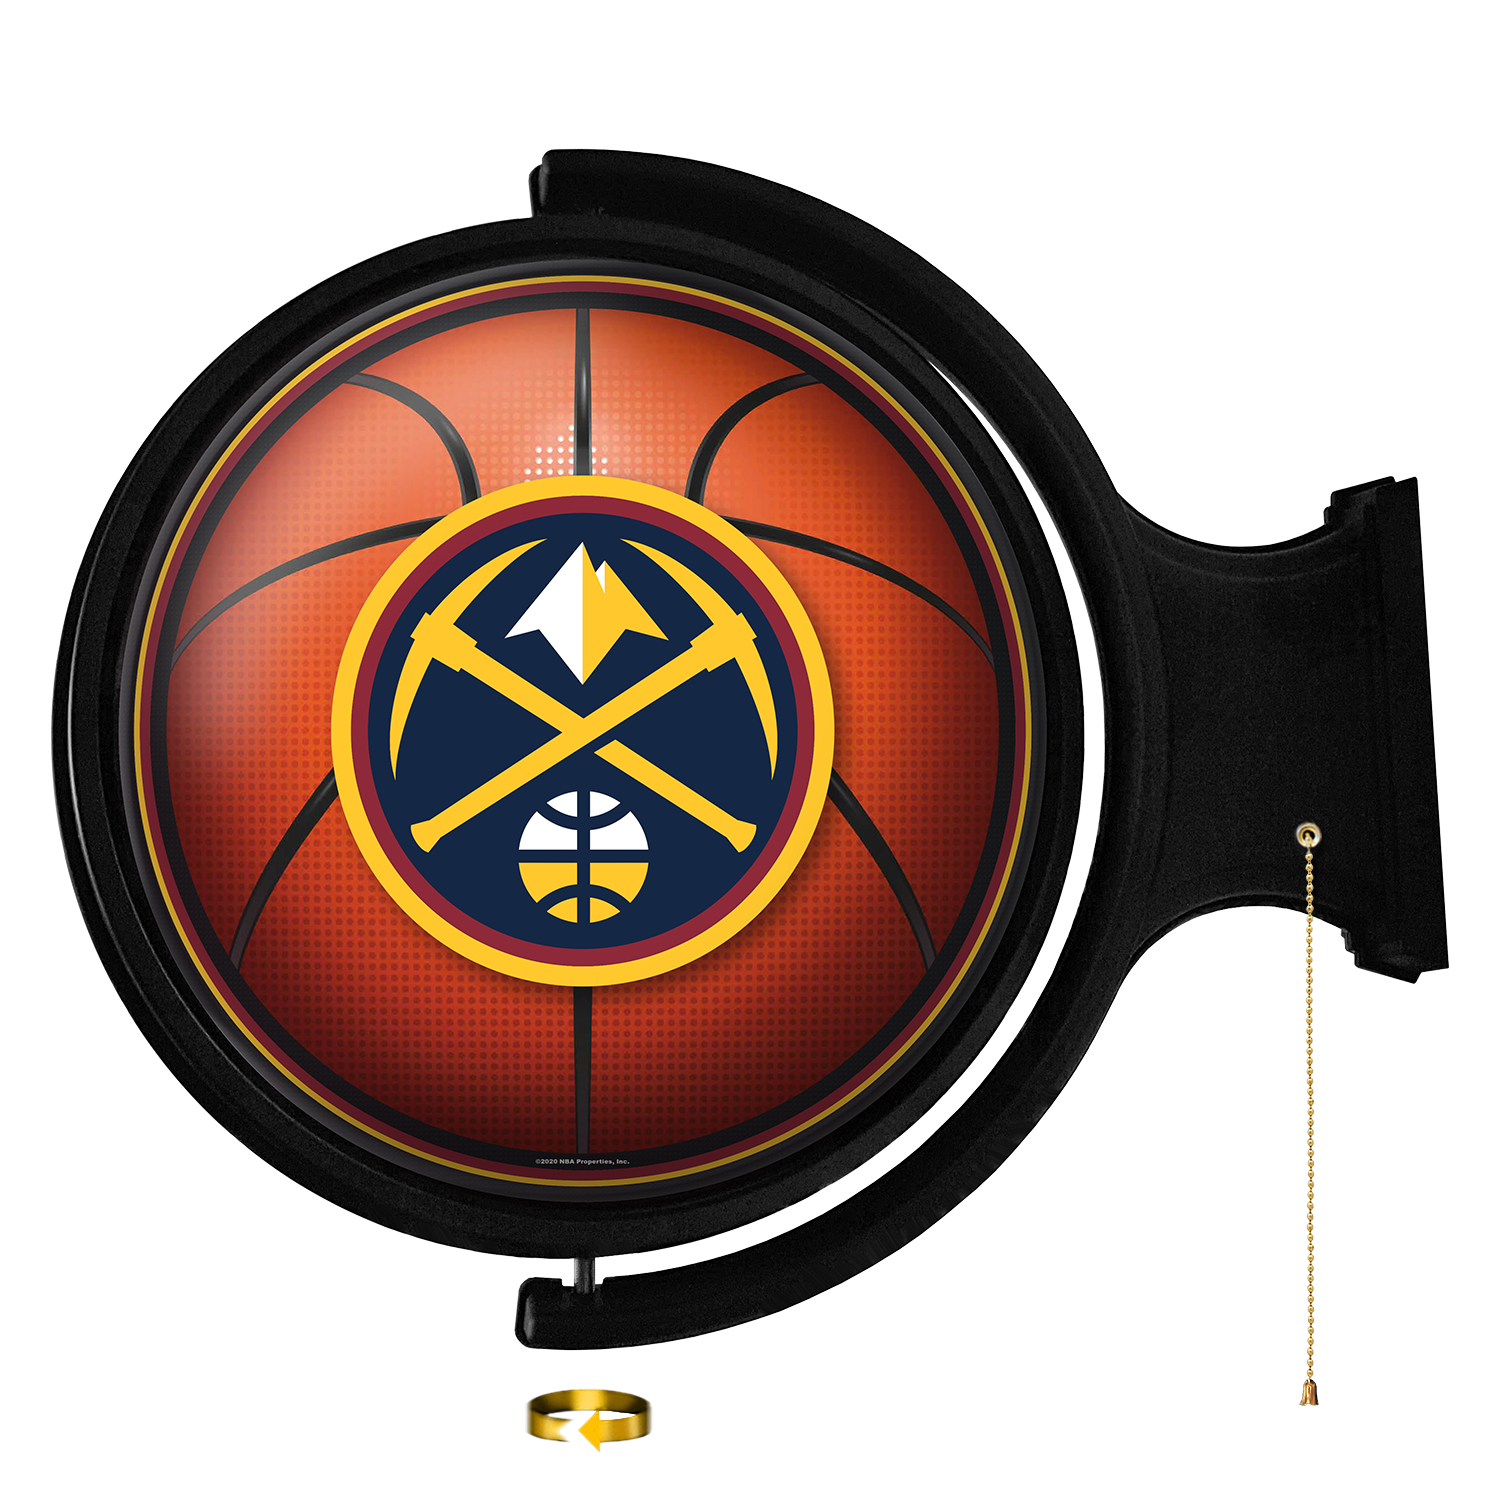 Denver Nuggets: Basketball - Original Round Rotating Lighted Wall Sign - The Fan-Brand